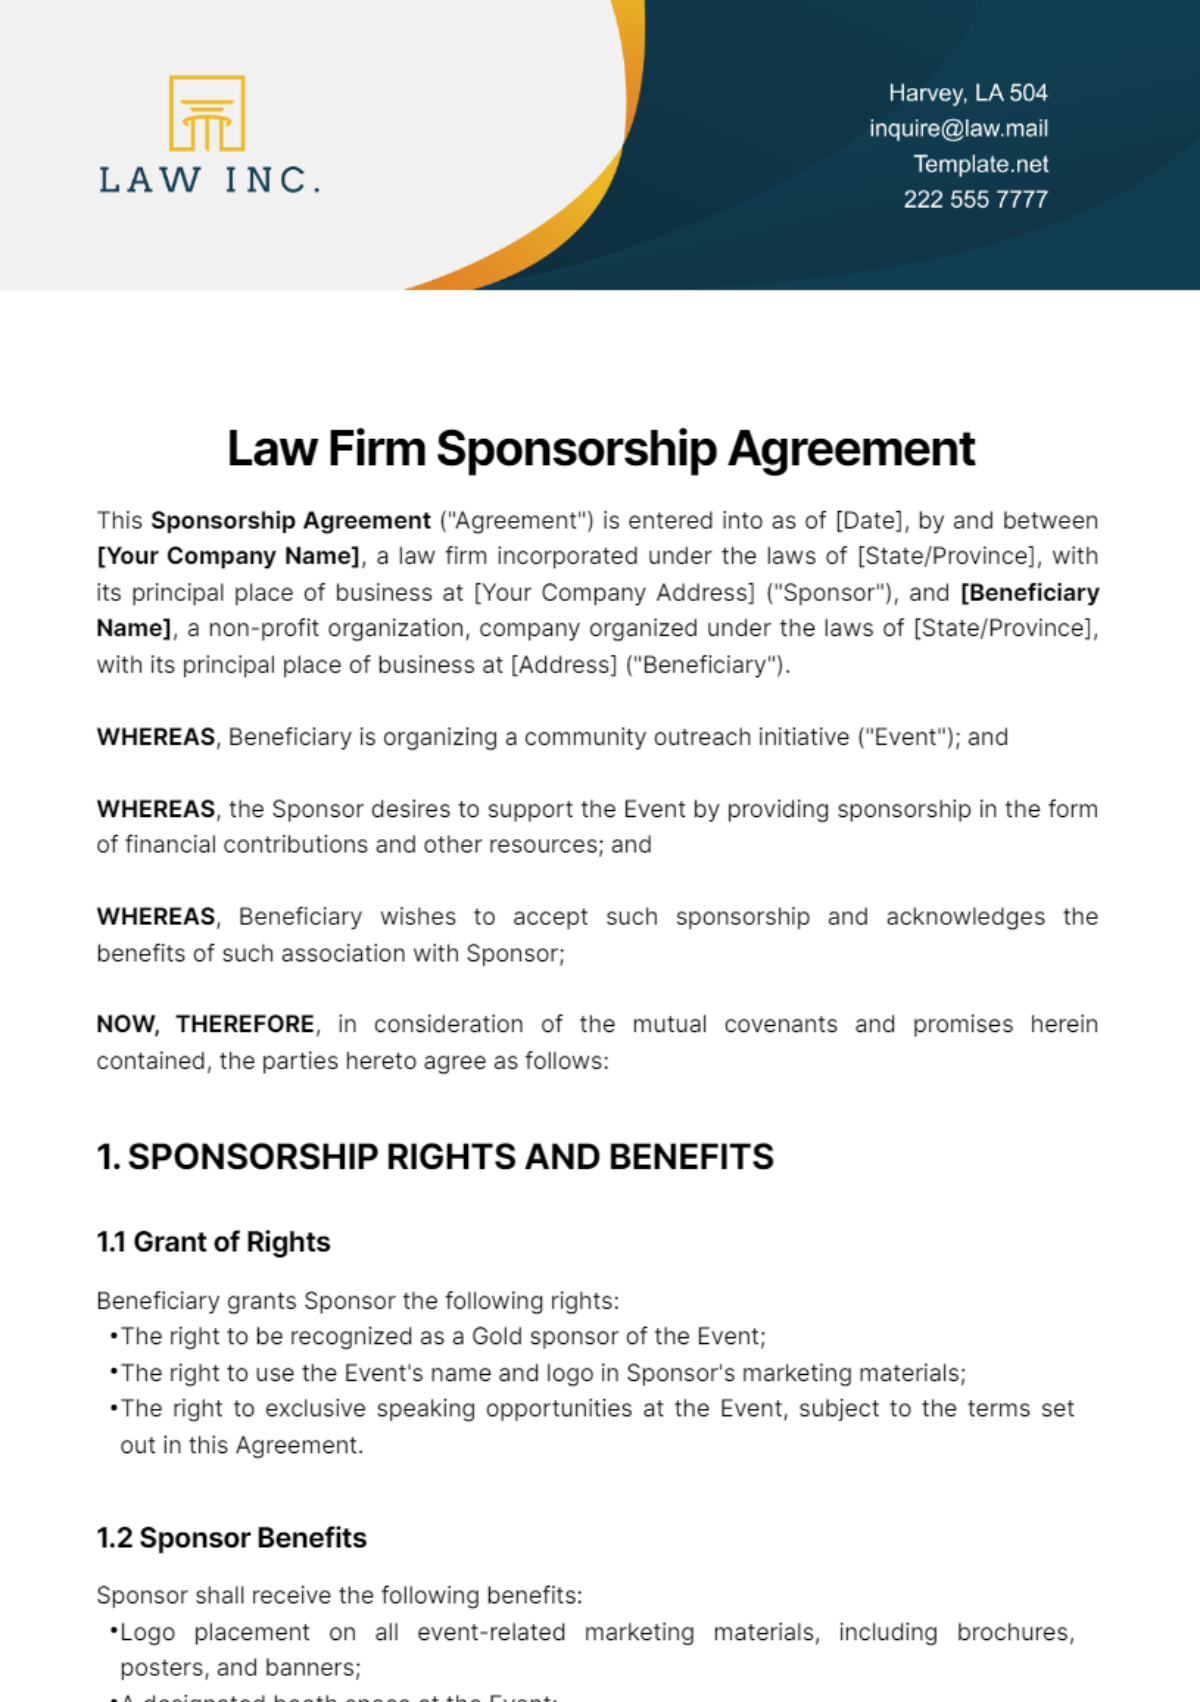 Law Firm Sponsorship Agreement Template